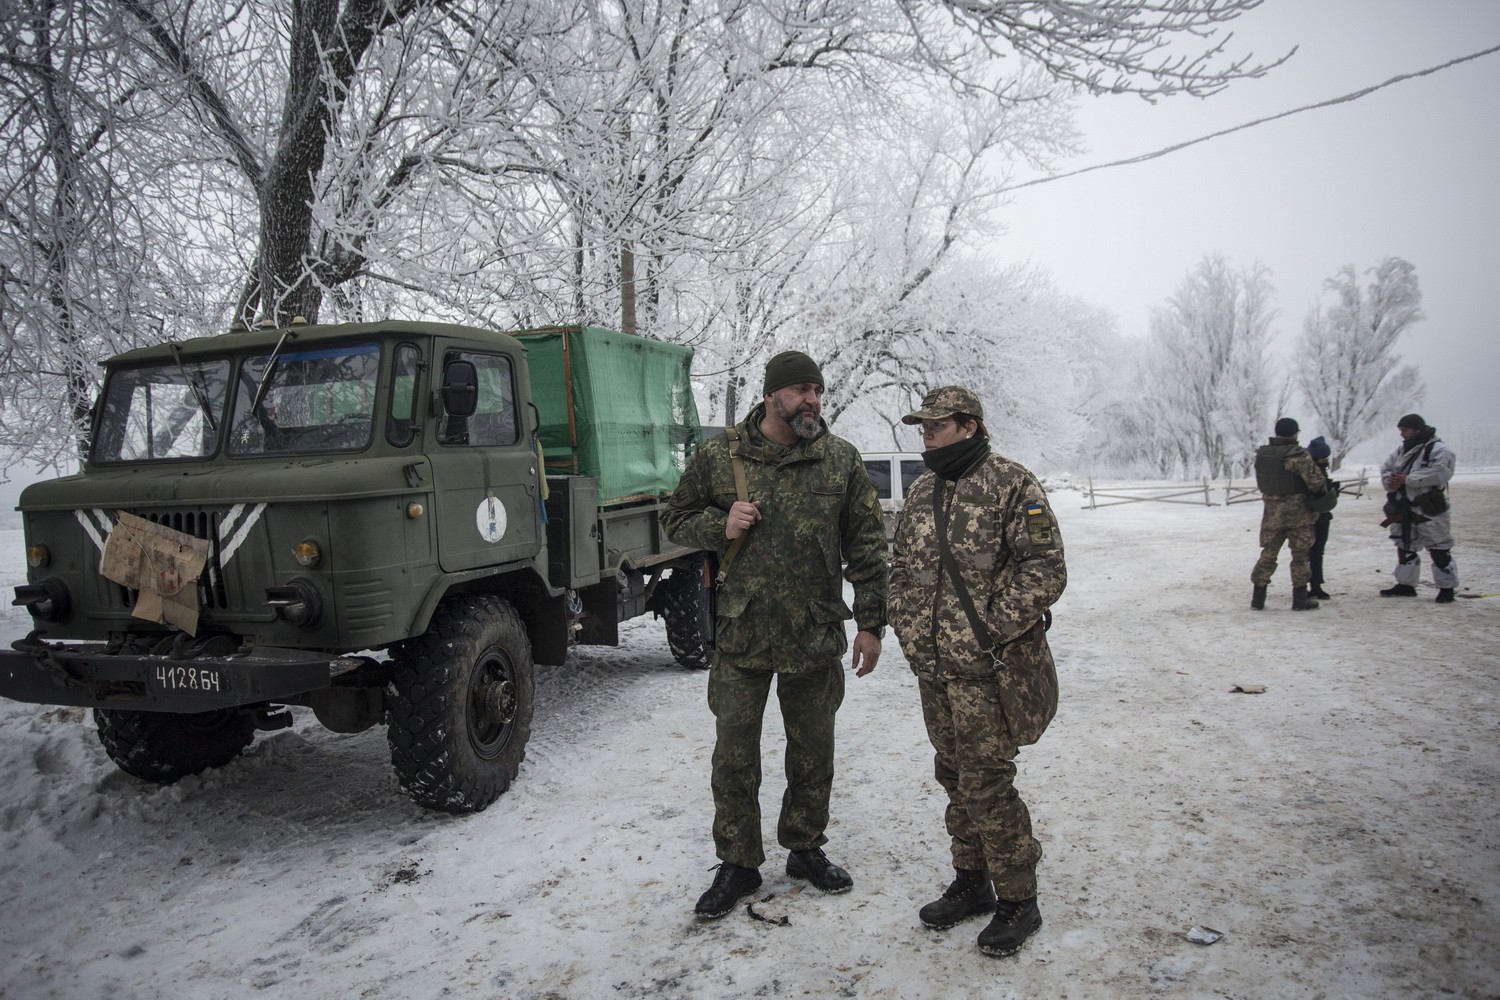 Soldiers from the Donbas battalion arrive at their base in a pig farm near Novoluhanske, Donetsk Oblast on Dec. 25.